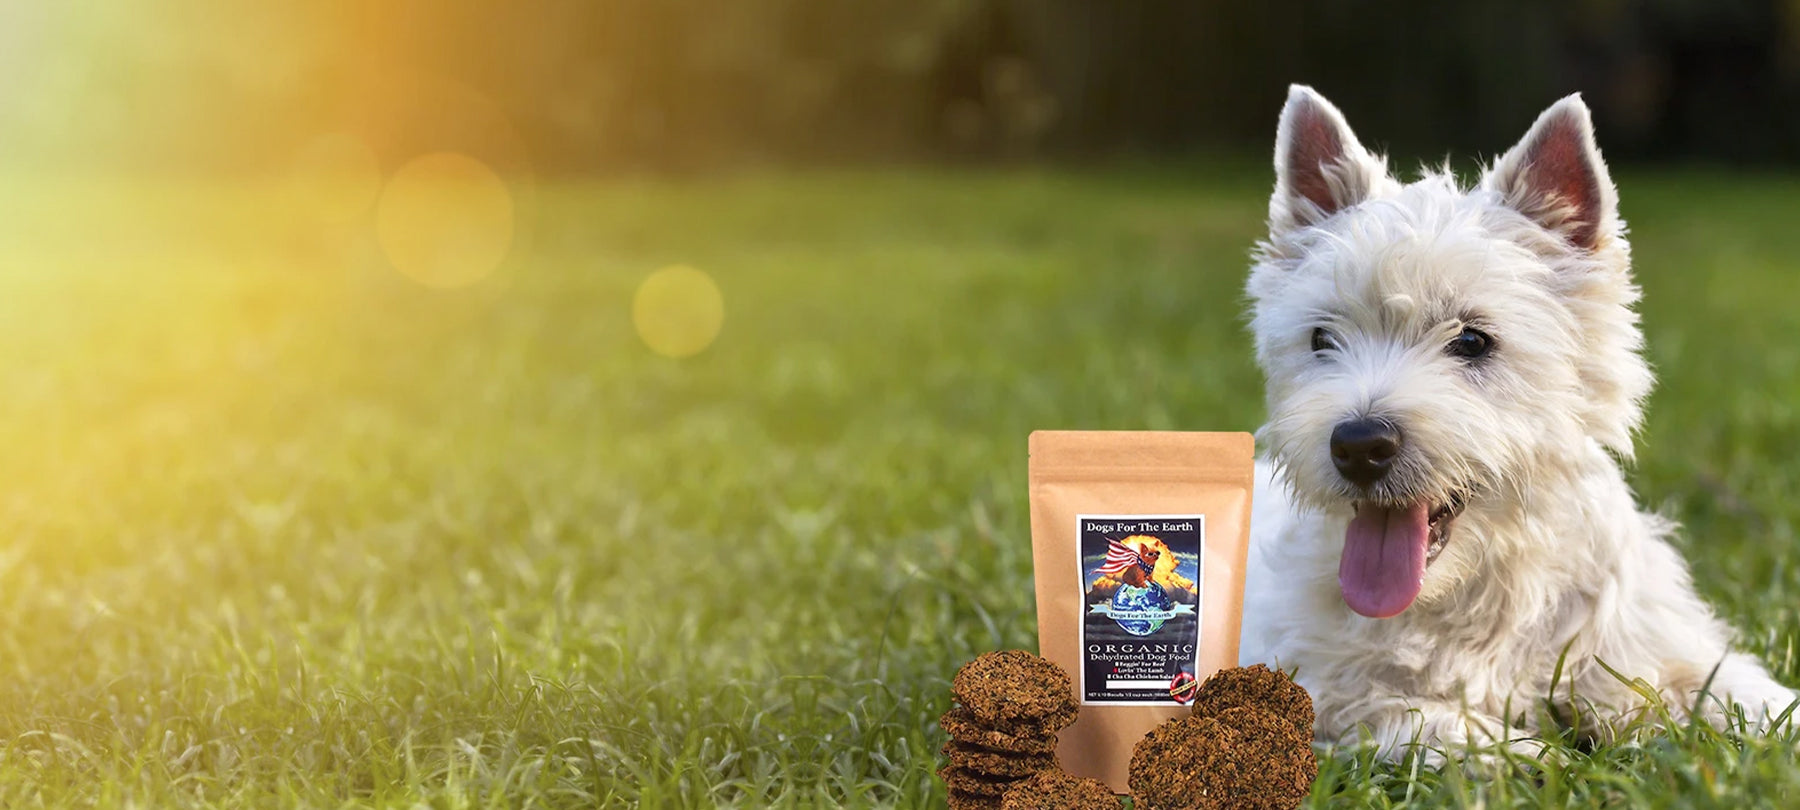 A dog sitting in a field with dog food in front of it.